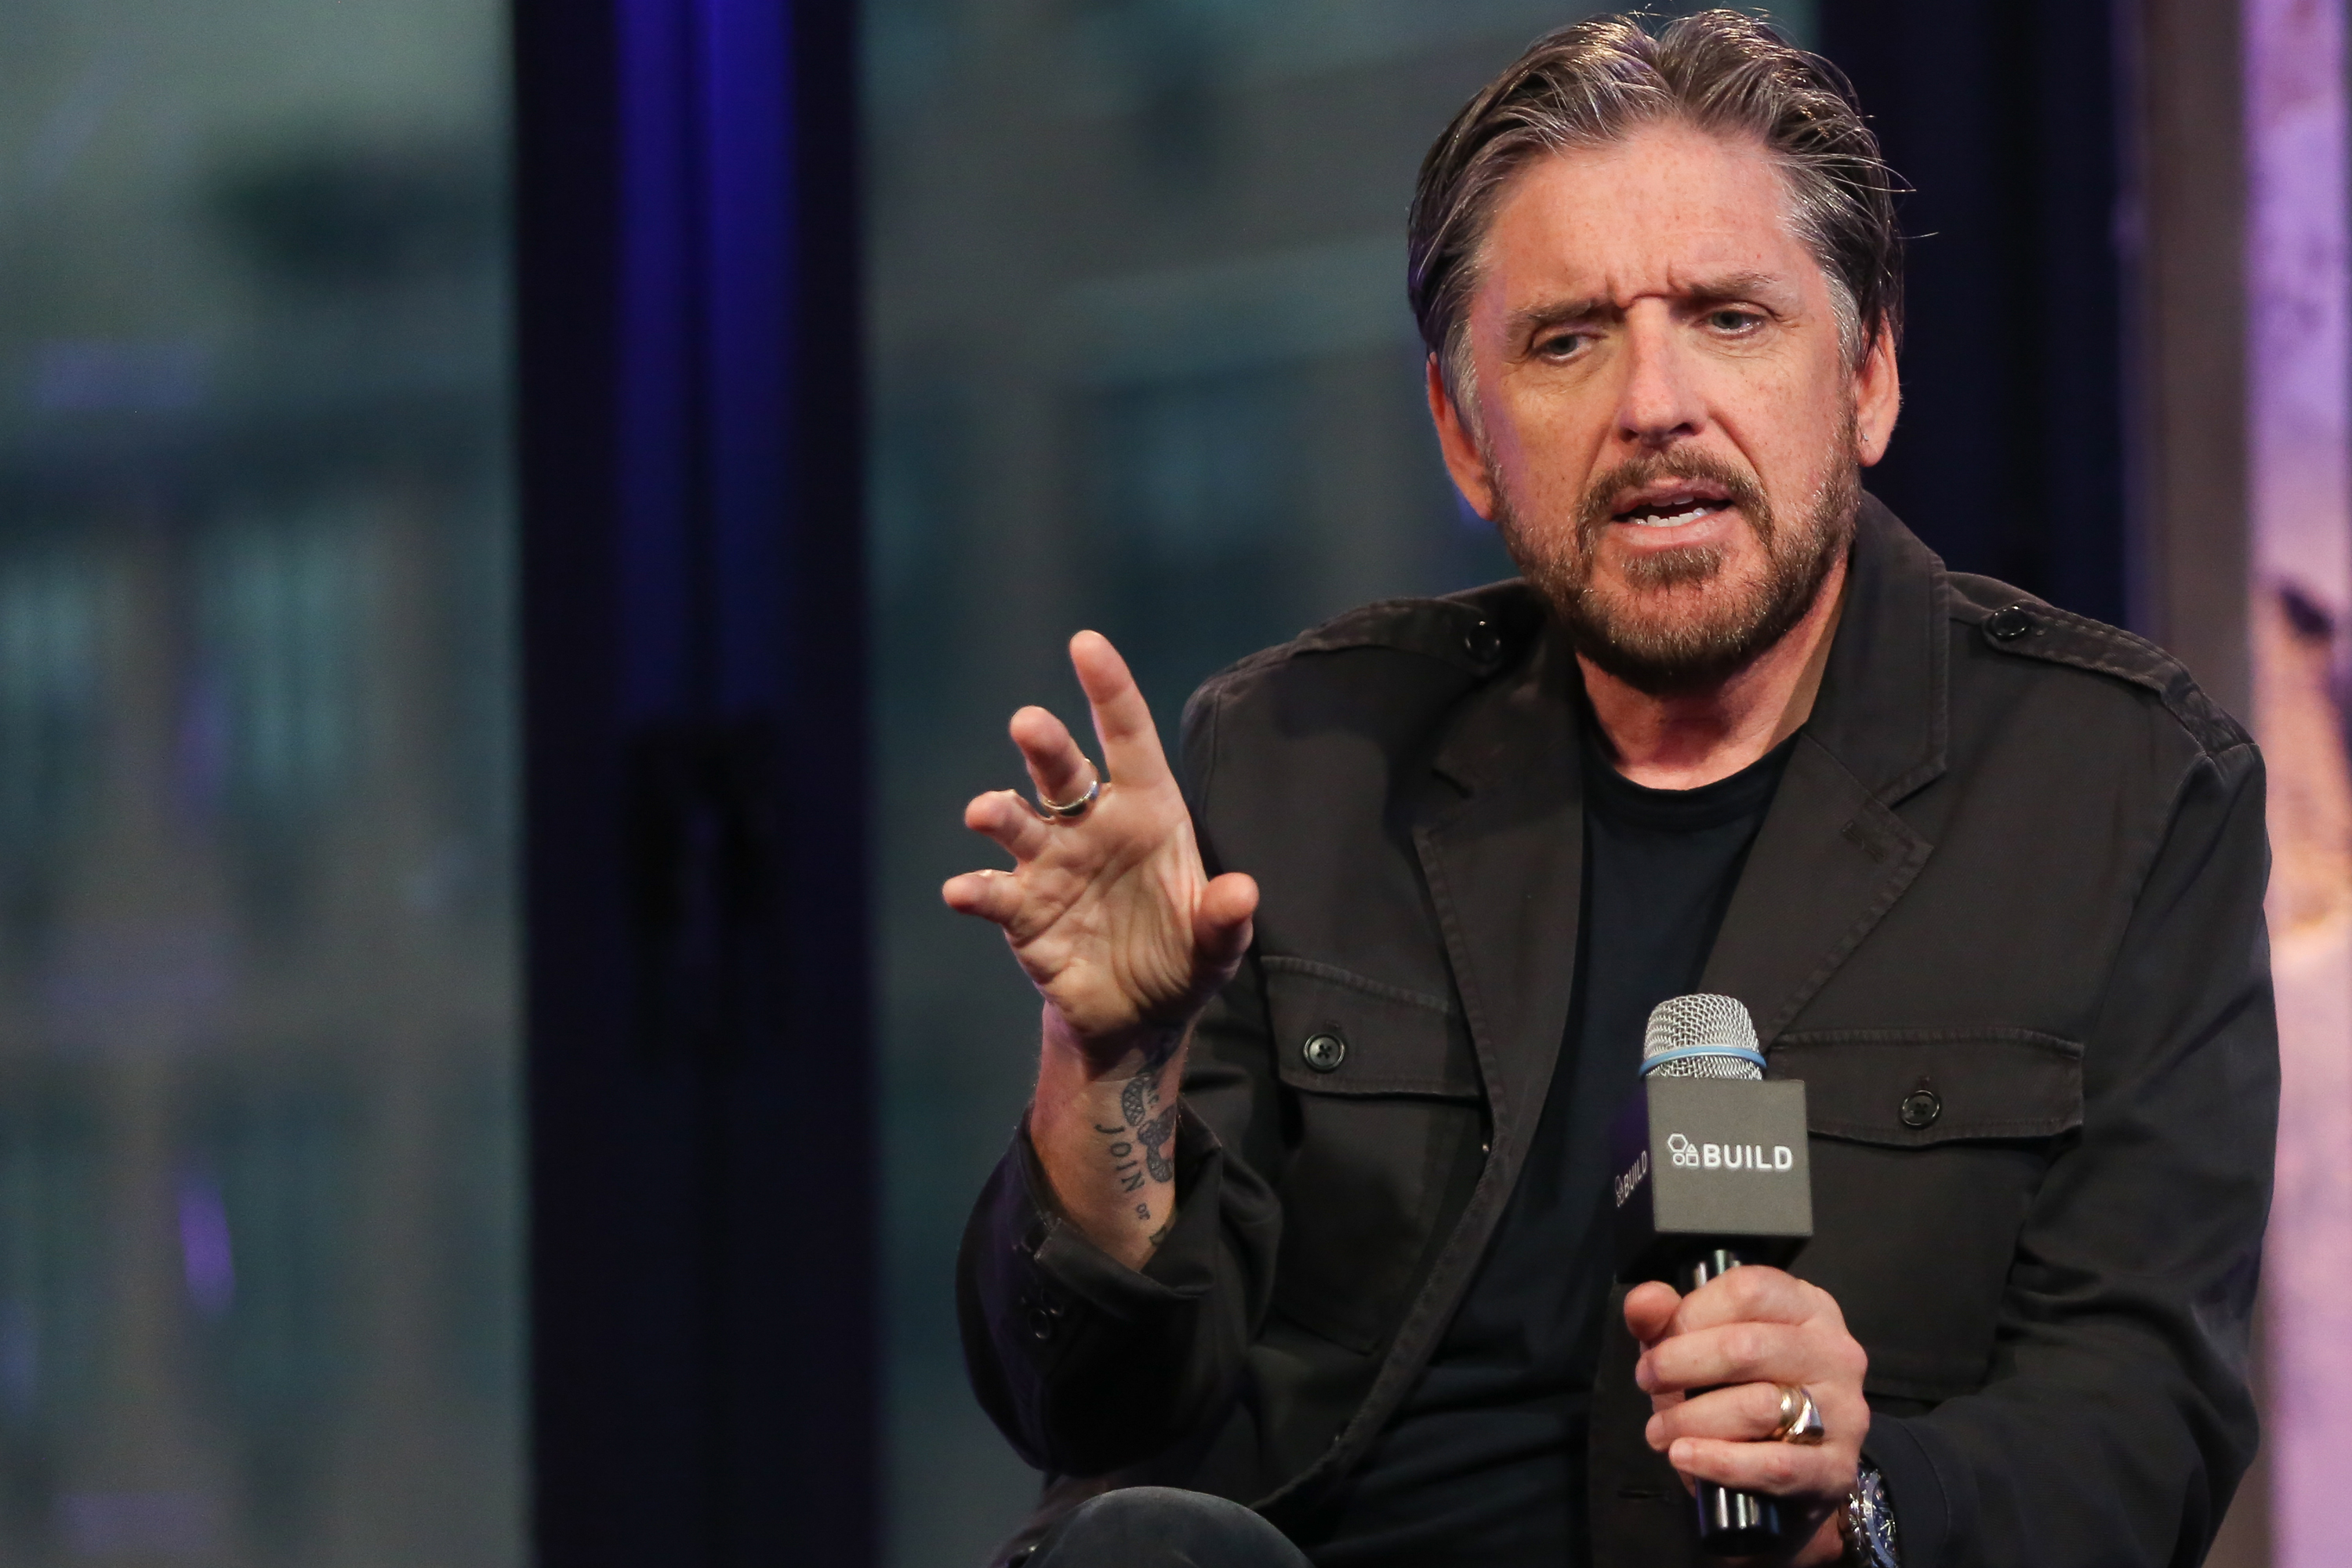 Craig Ferguson discusses "Join or Die"at AOL Studios on February 17, 2016, in New York City. | Source: Getty Images